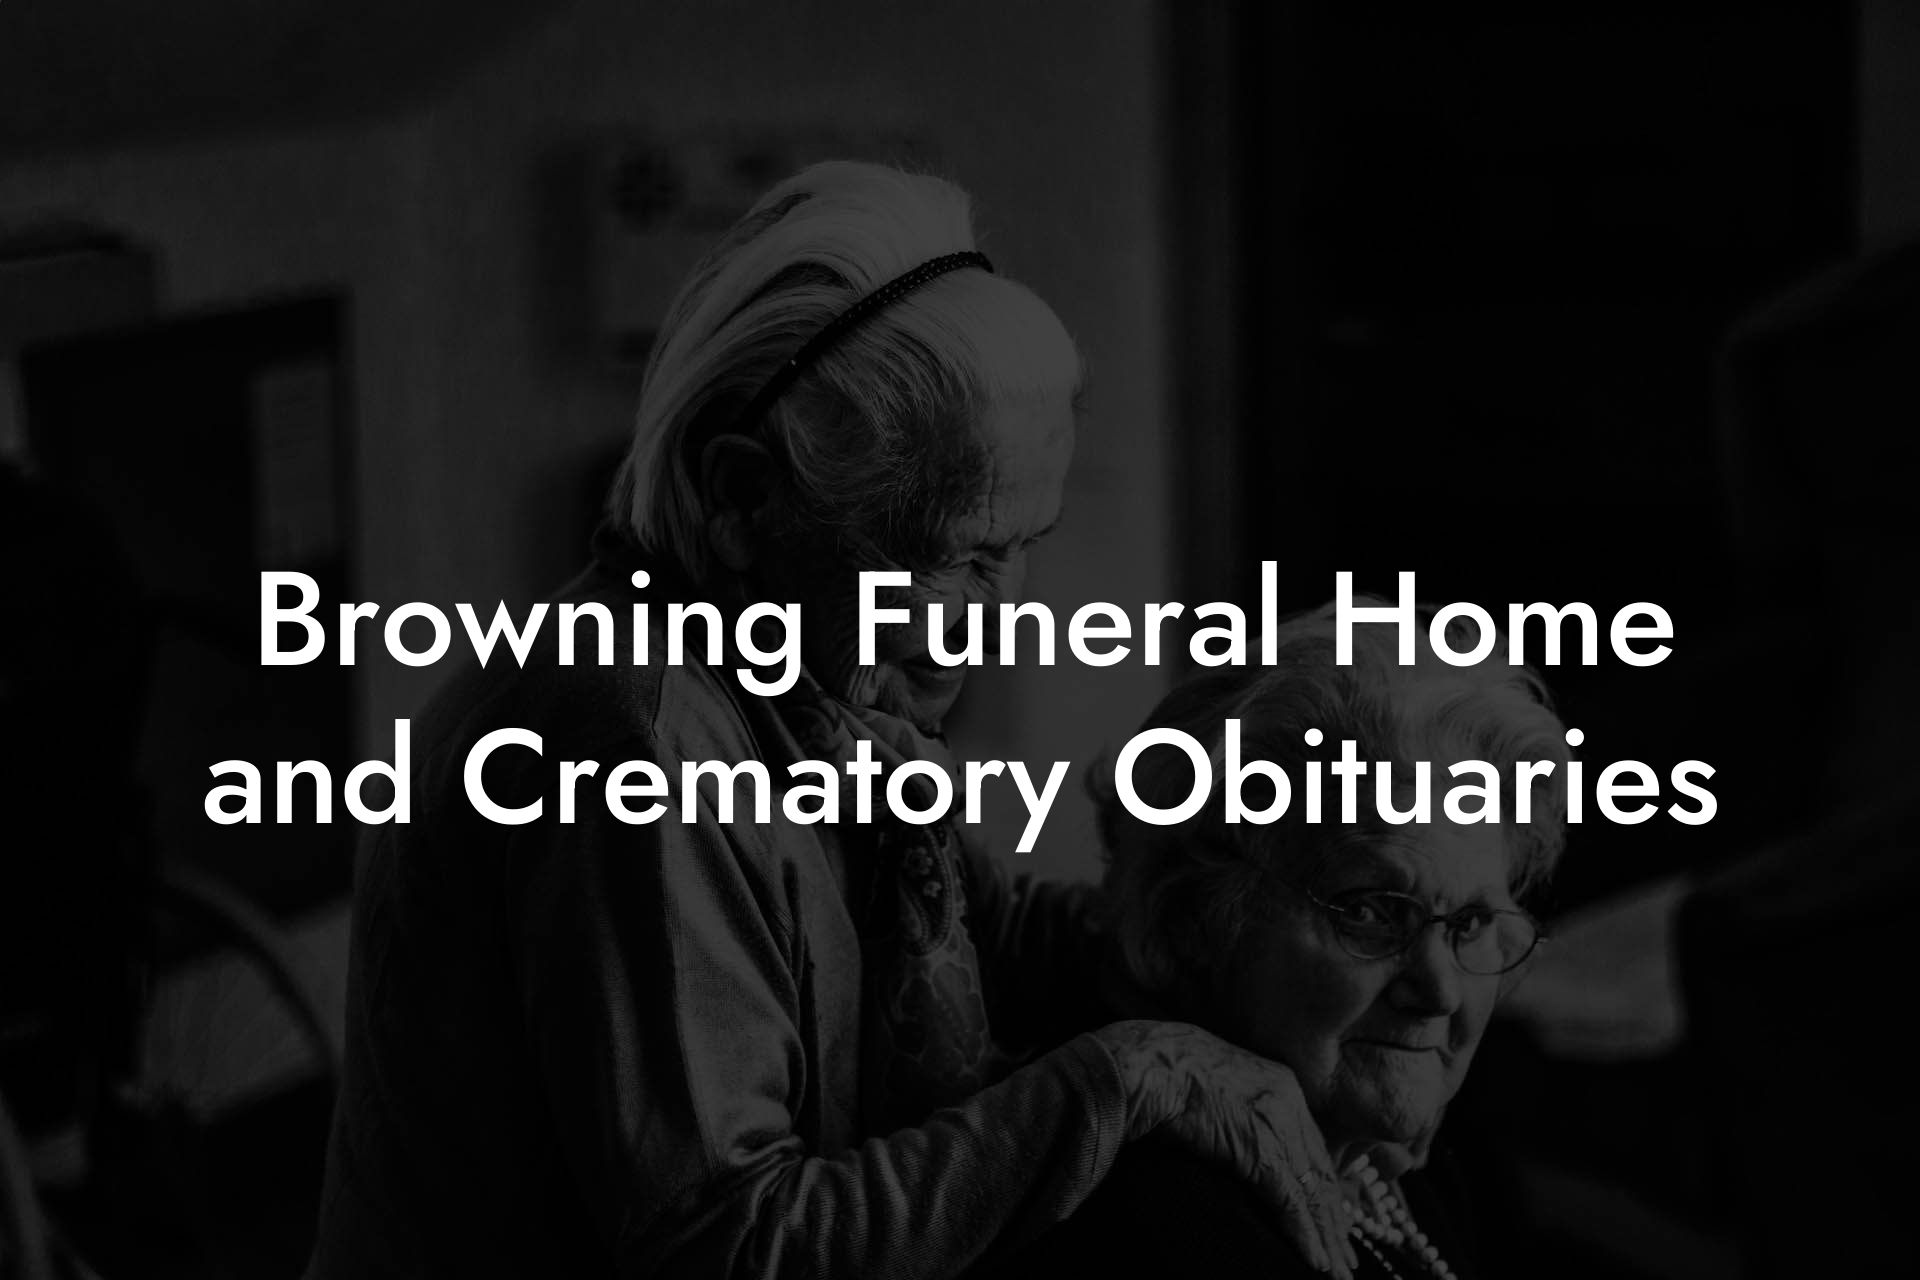 Browning Funeral Home and Crematory Obituaries